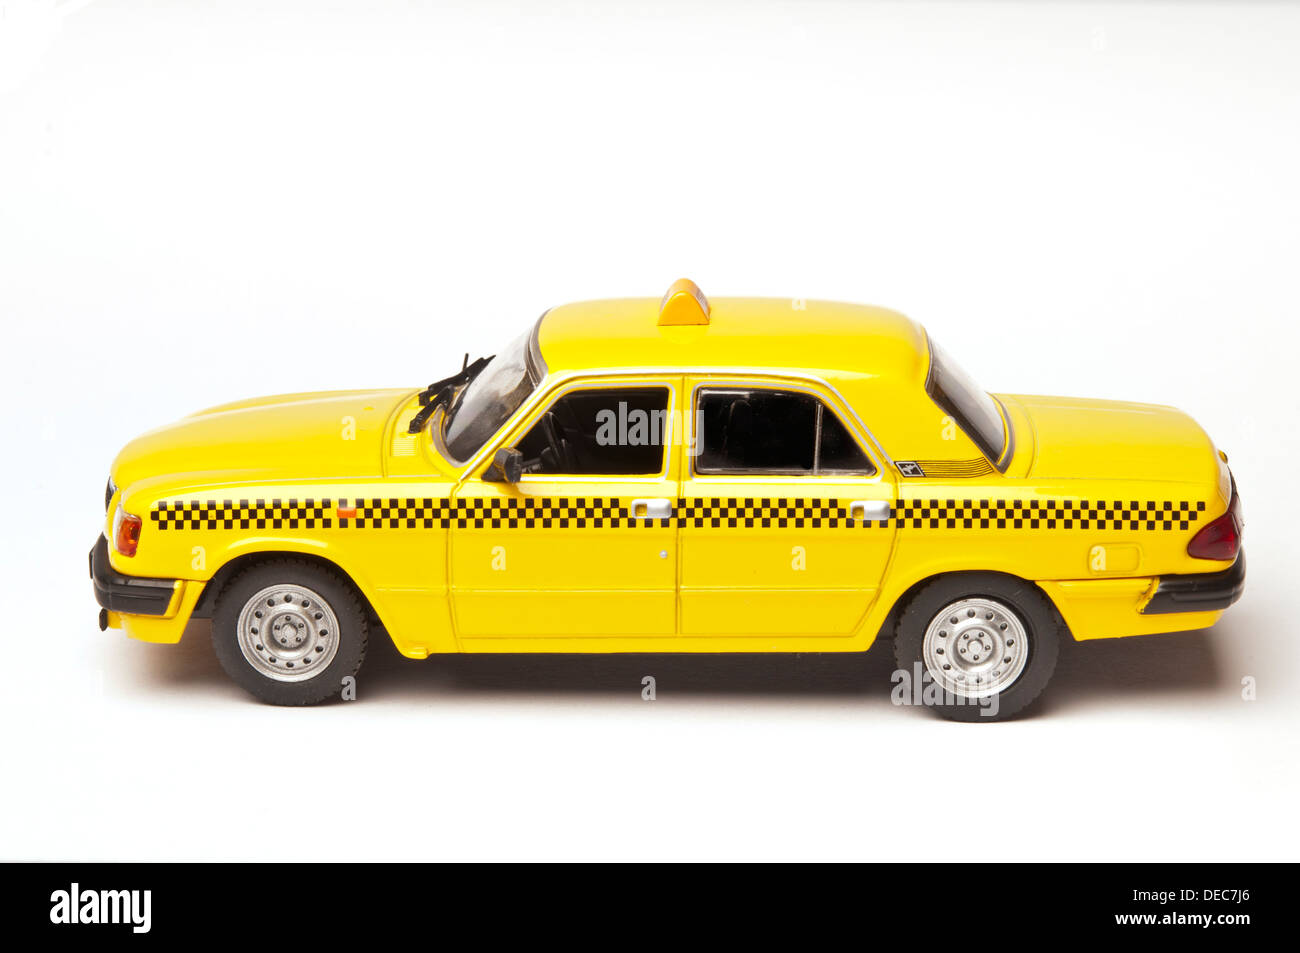 taxi toy car